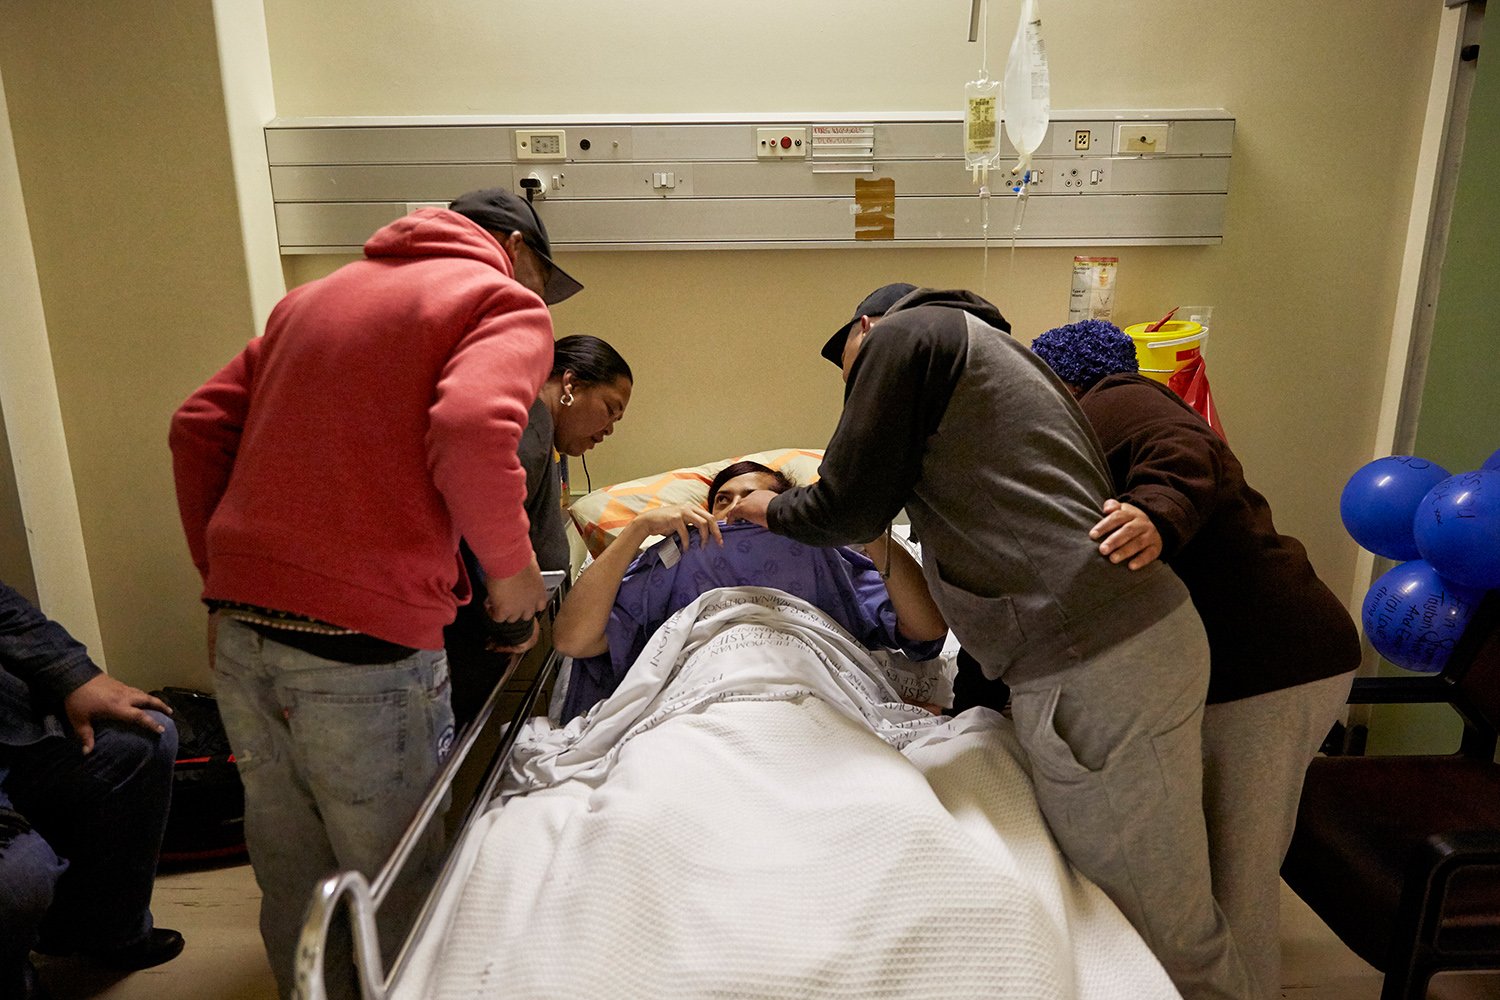  In the evening after her gender-affirming surgery, Chedino shows off her new breasts to Keagan and his mother (right) and a few of her friends, Groote Schuur Hospital, Cape Town, 2017. 